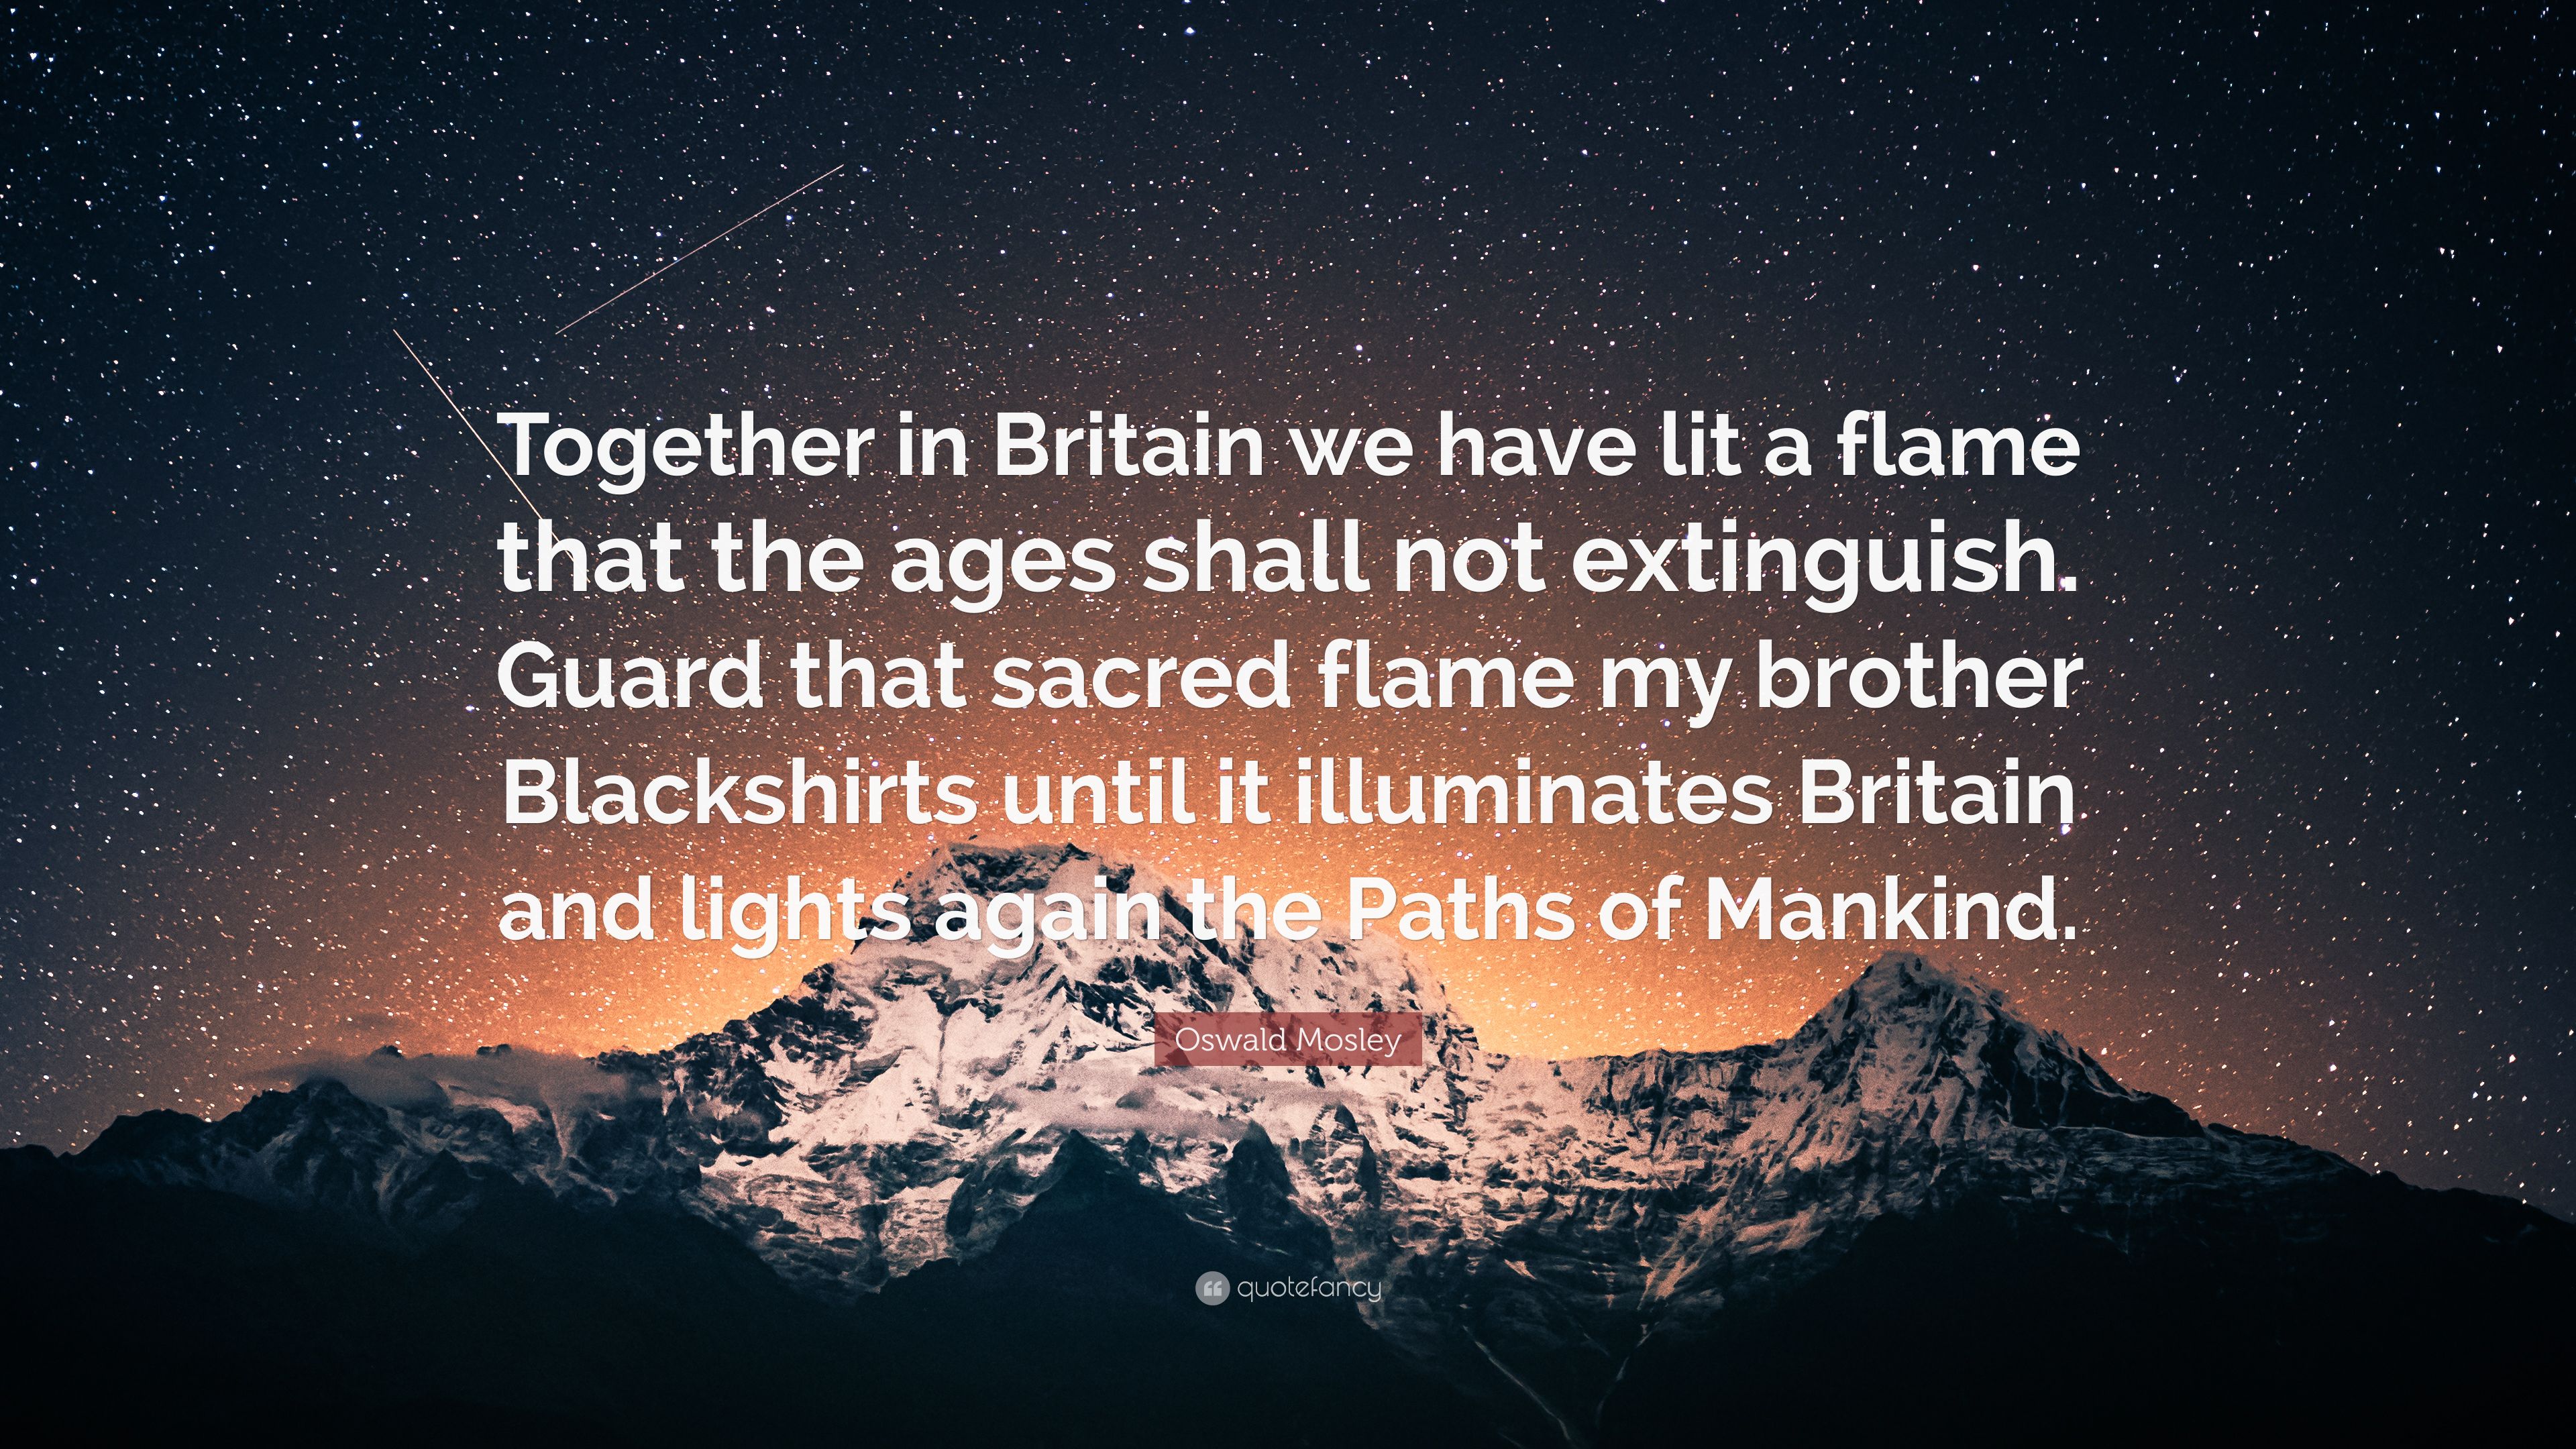 Oswald Mosley Quote: “Together in Britain we have lit a flame that ...